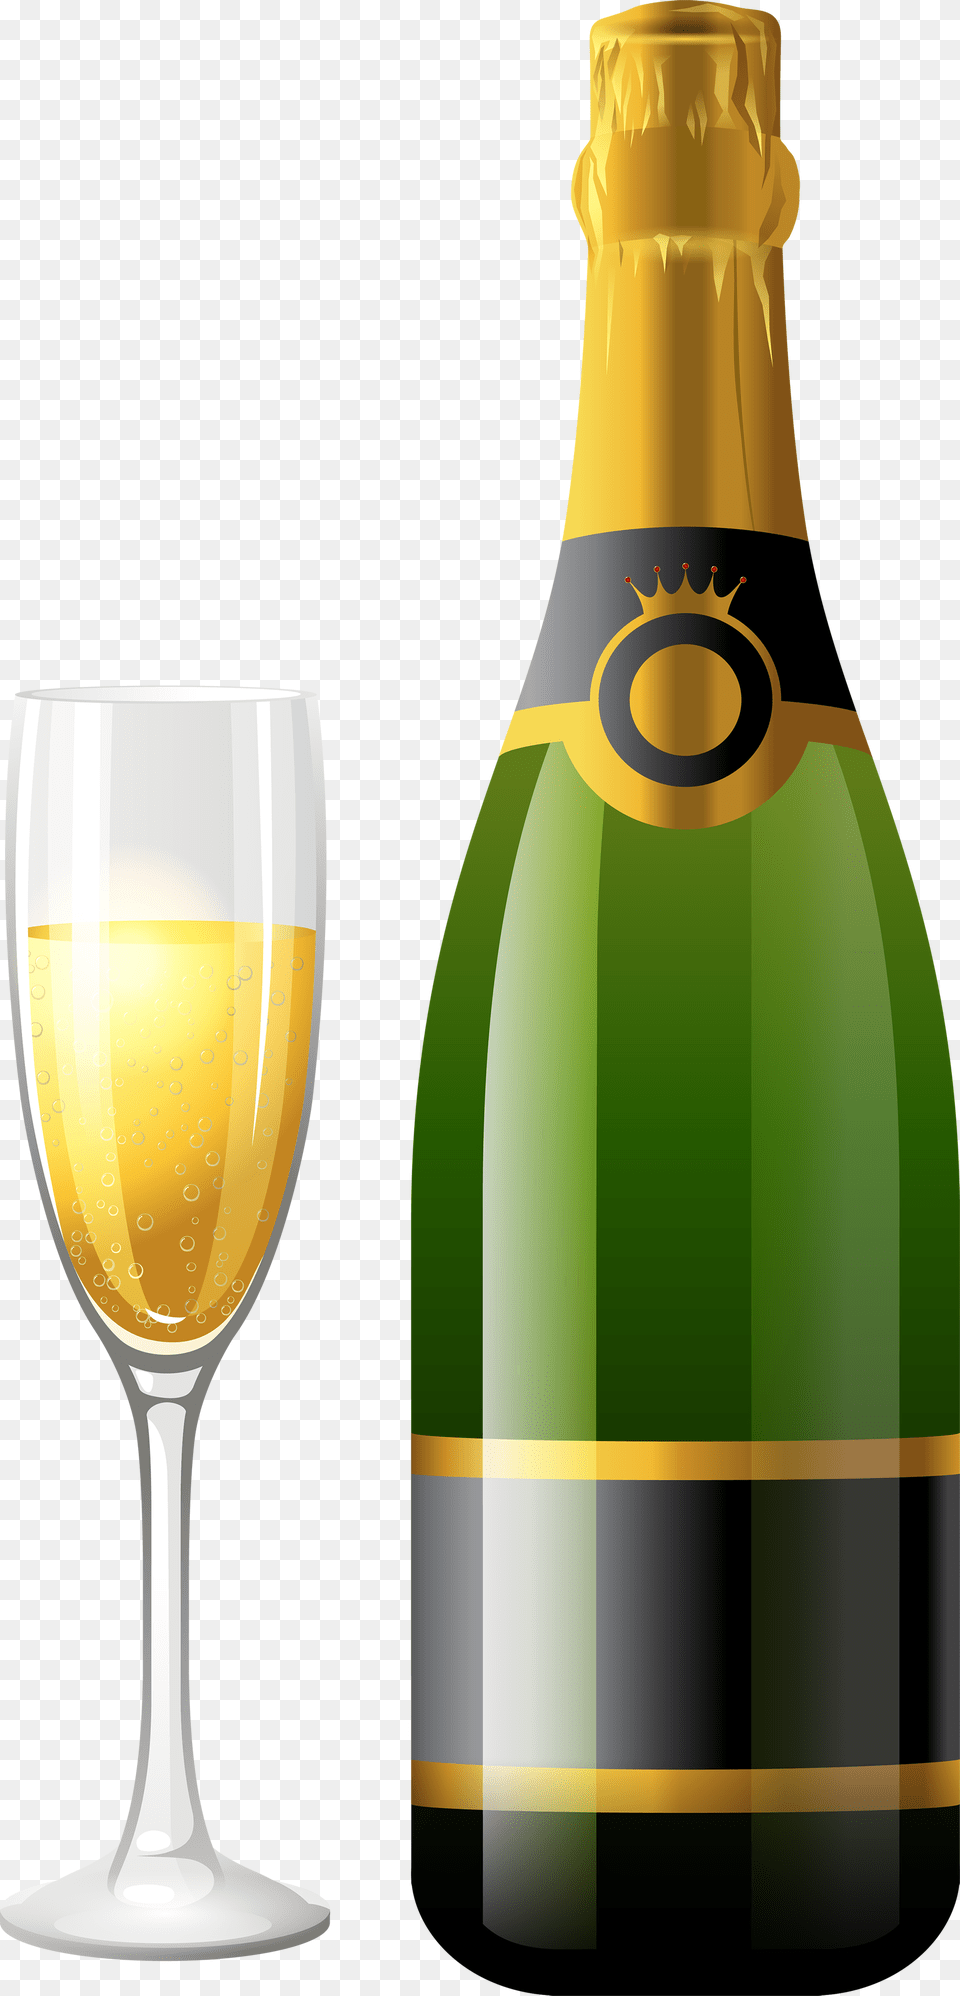 Champagne Images Champagne Bottle Glass, Alcohol, Wine, Liquor, Beverage Png